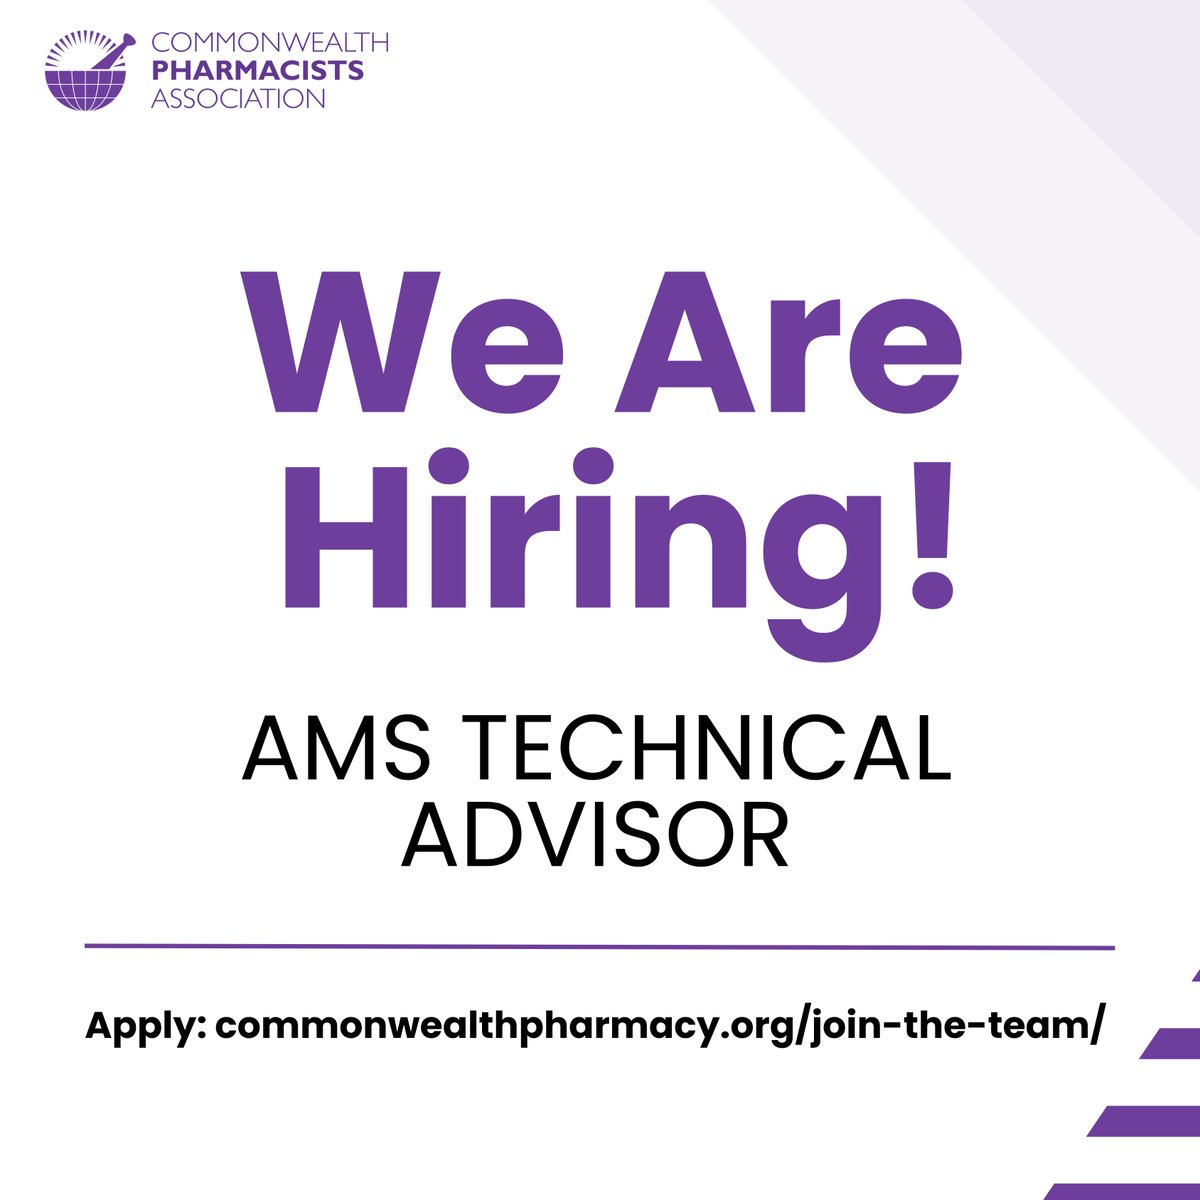 #Hiring: AMS Technical Advisor for the CPA’s SPARC Programme. We work with our partner countries to build workforce capability, capacity and resilience in health systems, in the drive for better global antimicrobial stewardship (AMS). Apply - commonwealthpharmacy.org/join-the-team/